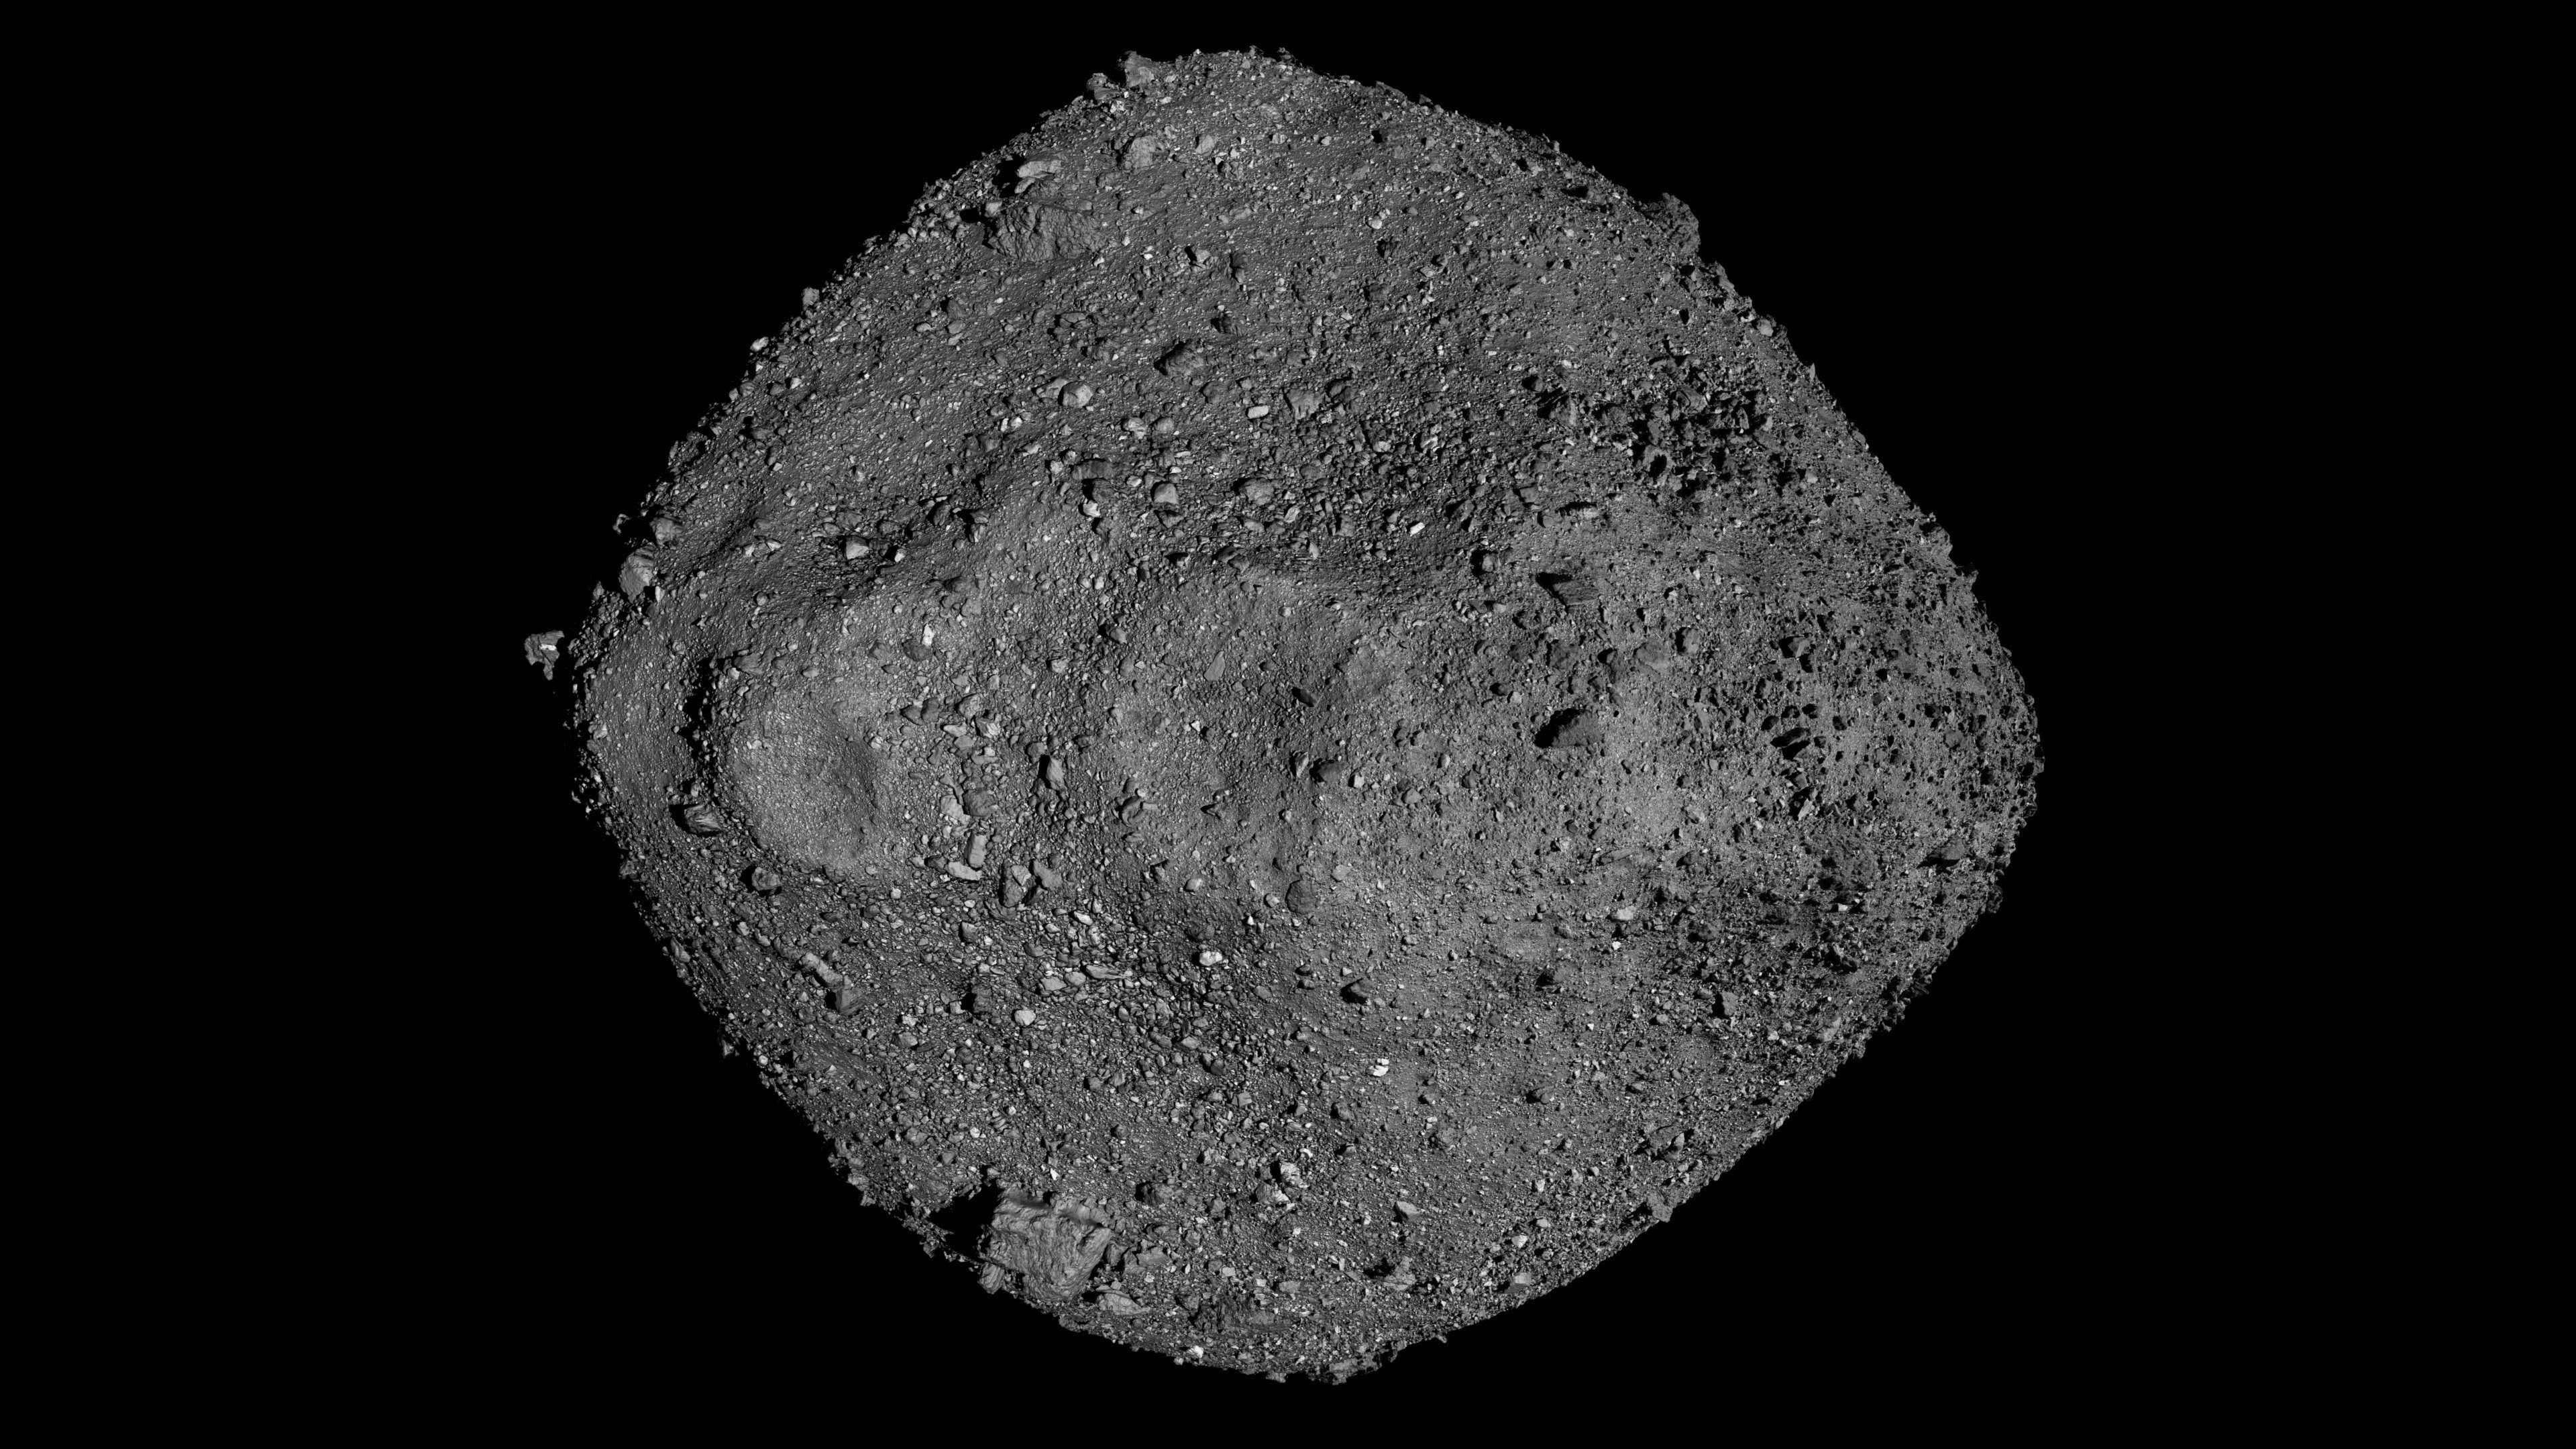  Asteroid Bennu sports landslide and massive crater from tiny space rock 